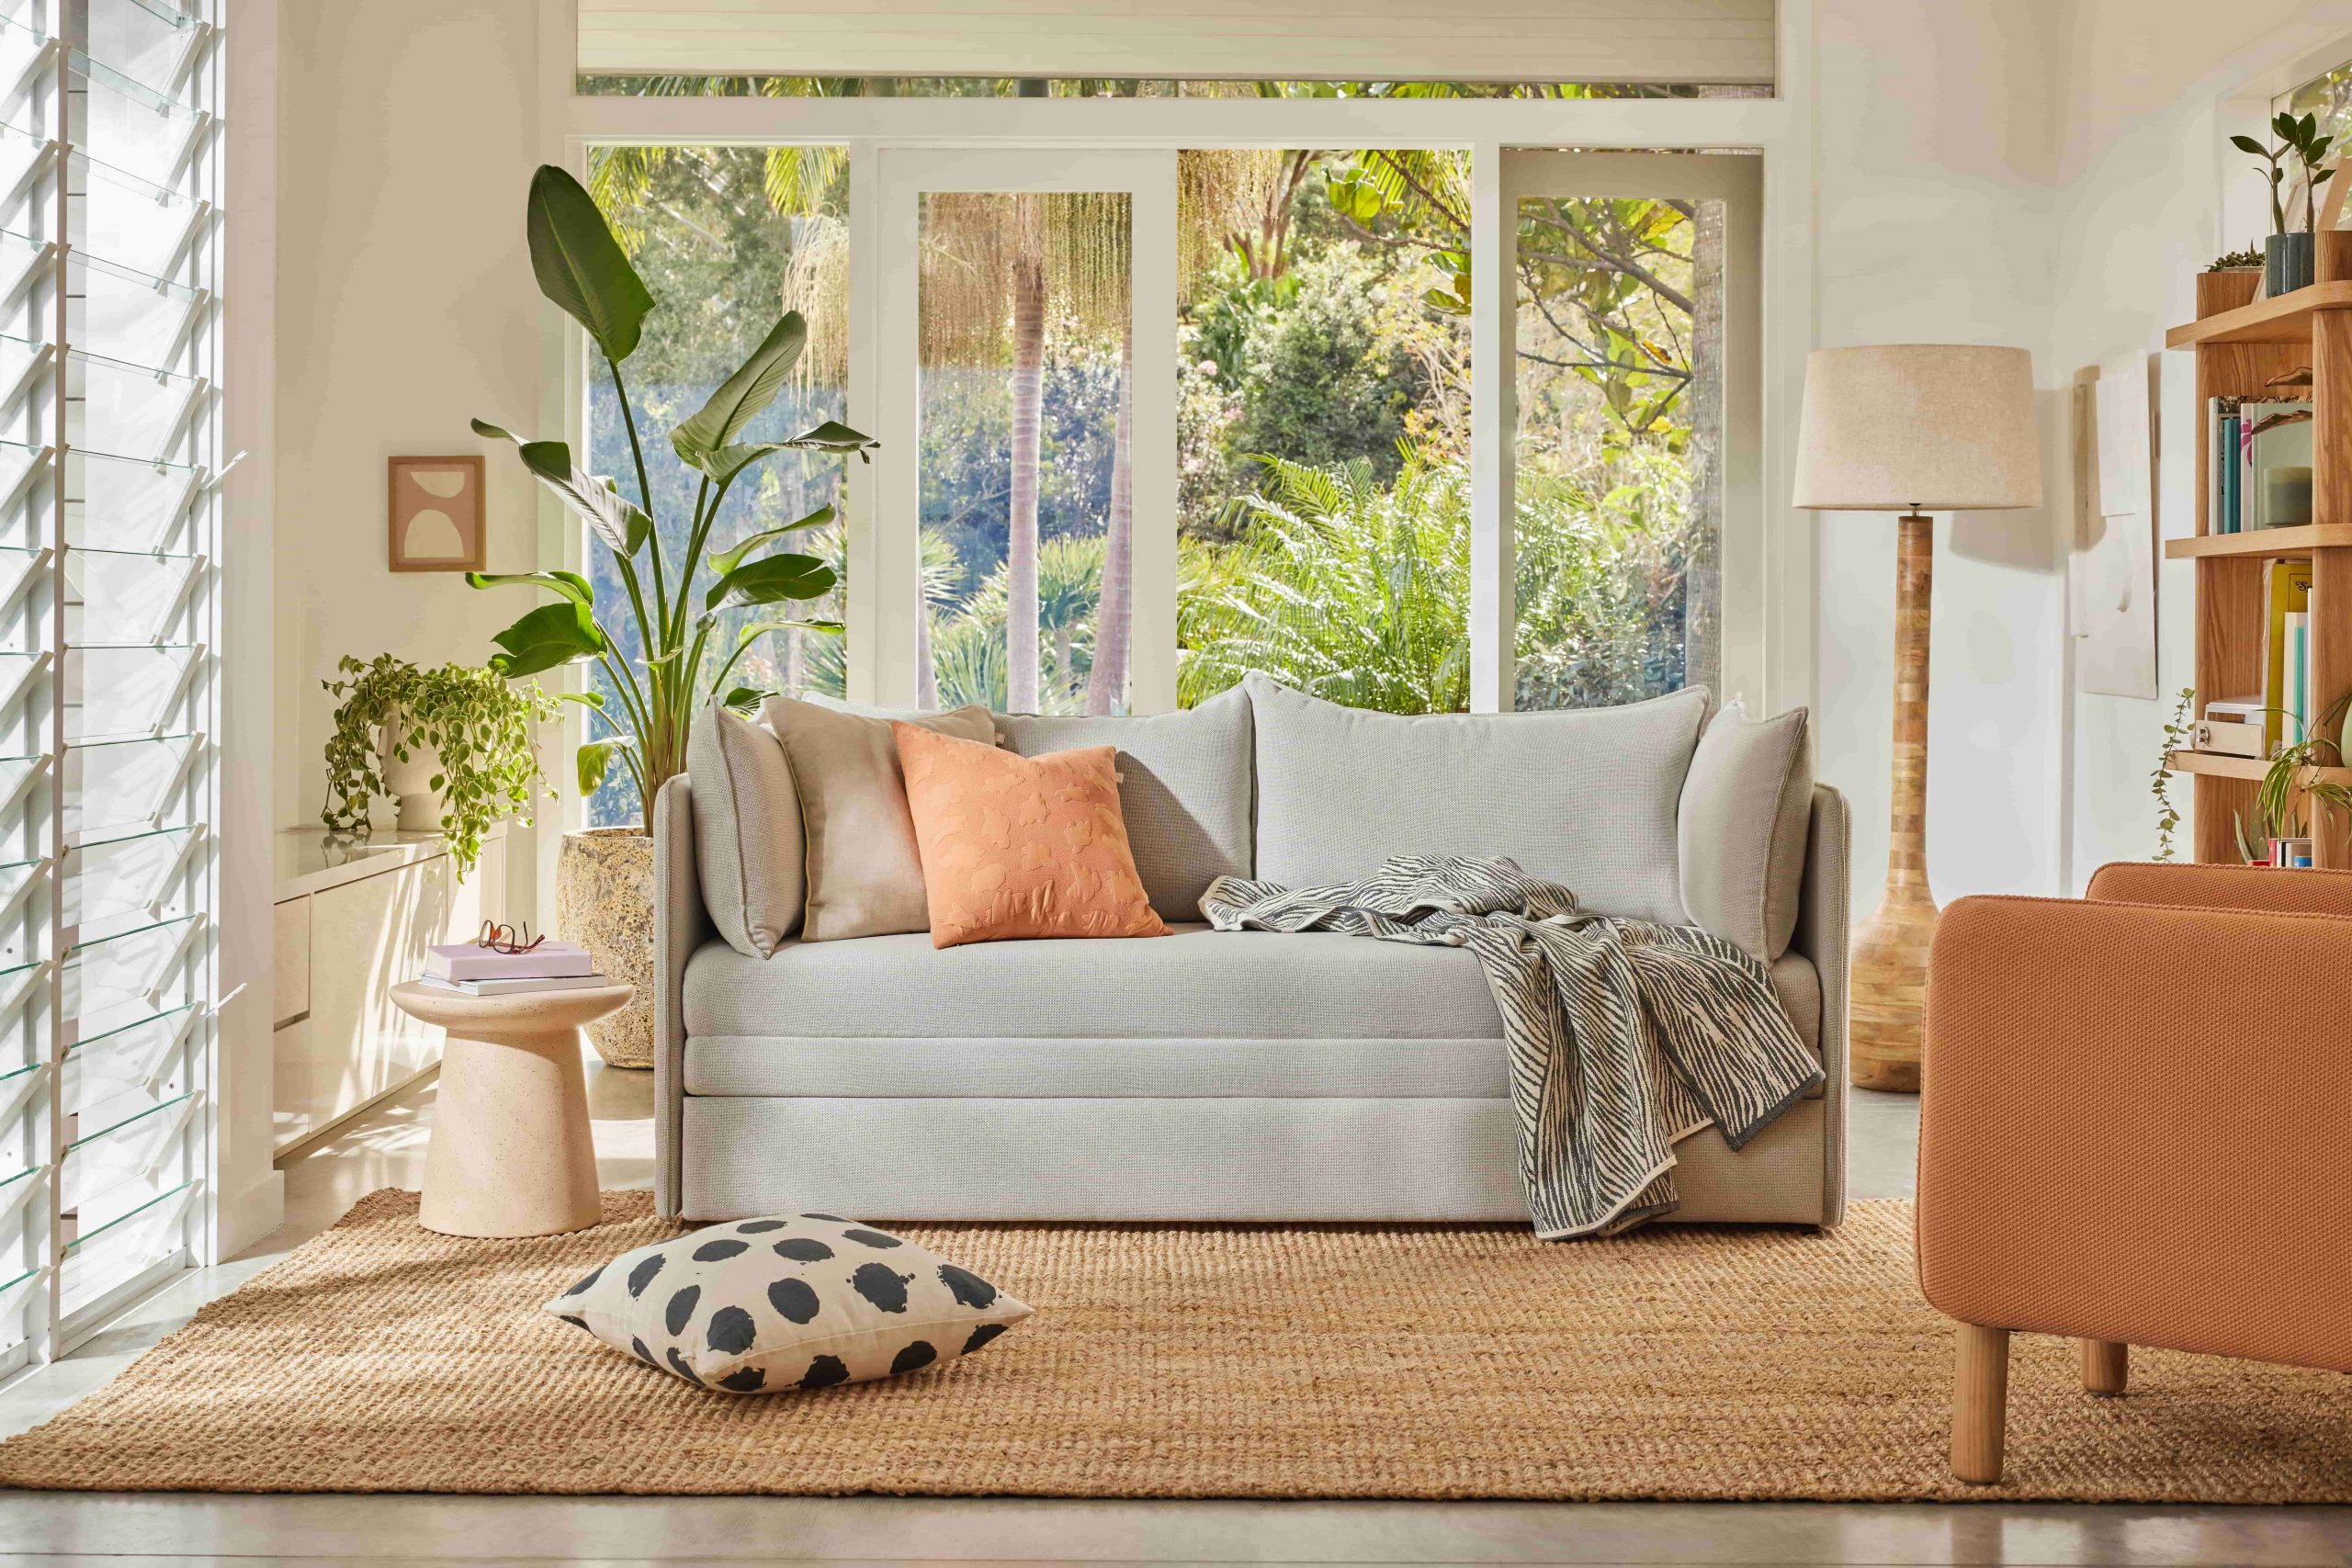 Can I was pillows? Light grey sofa bed decorated with homewares in a sunlit room